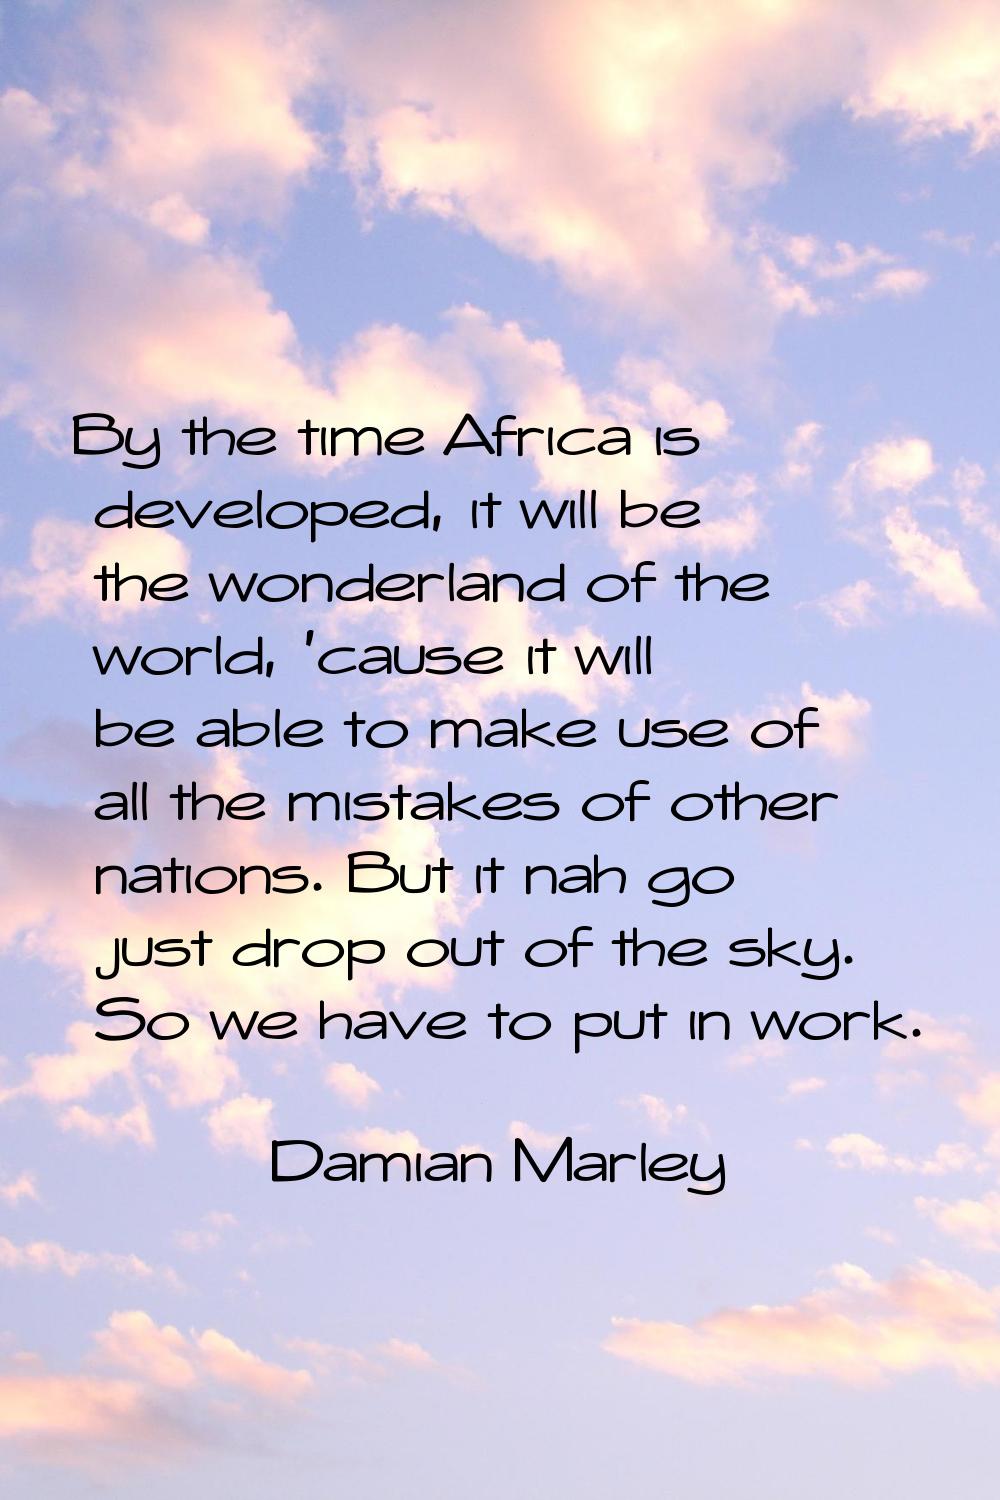 By the time Africa is developed, it will be the wonderland of the world, 'cause it will be able to 